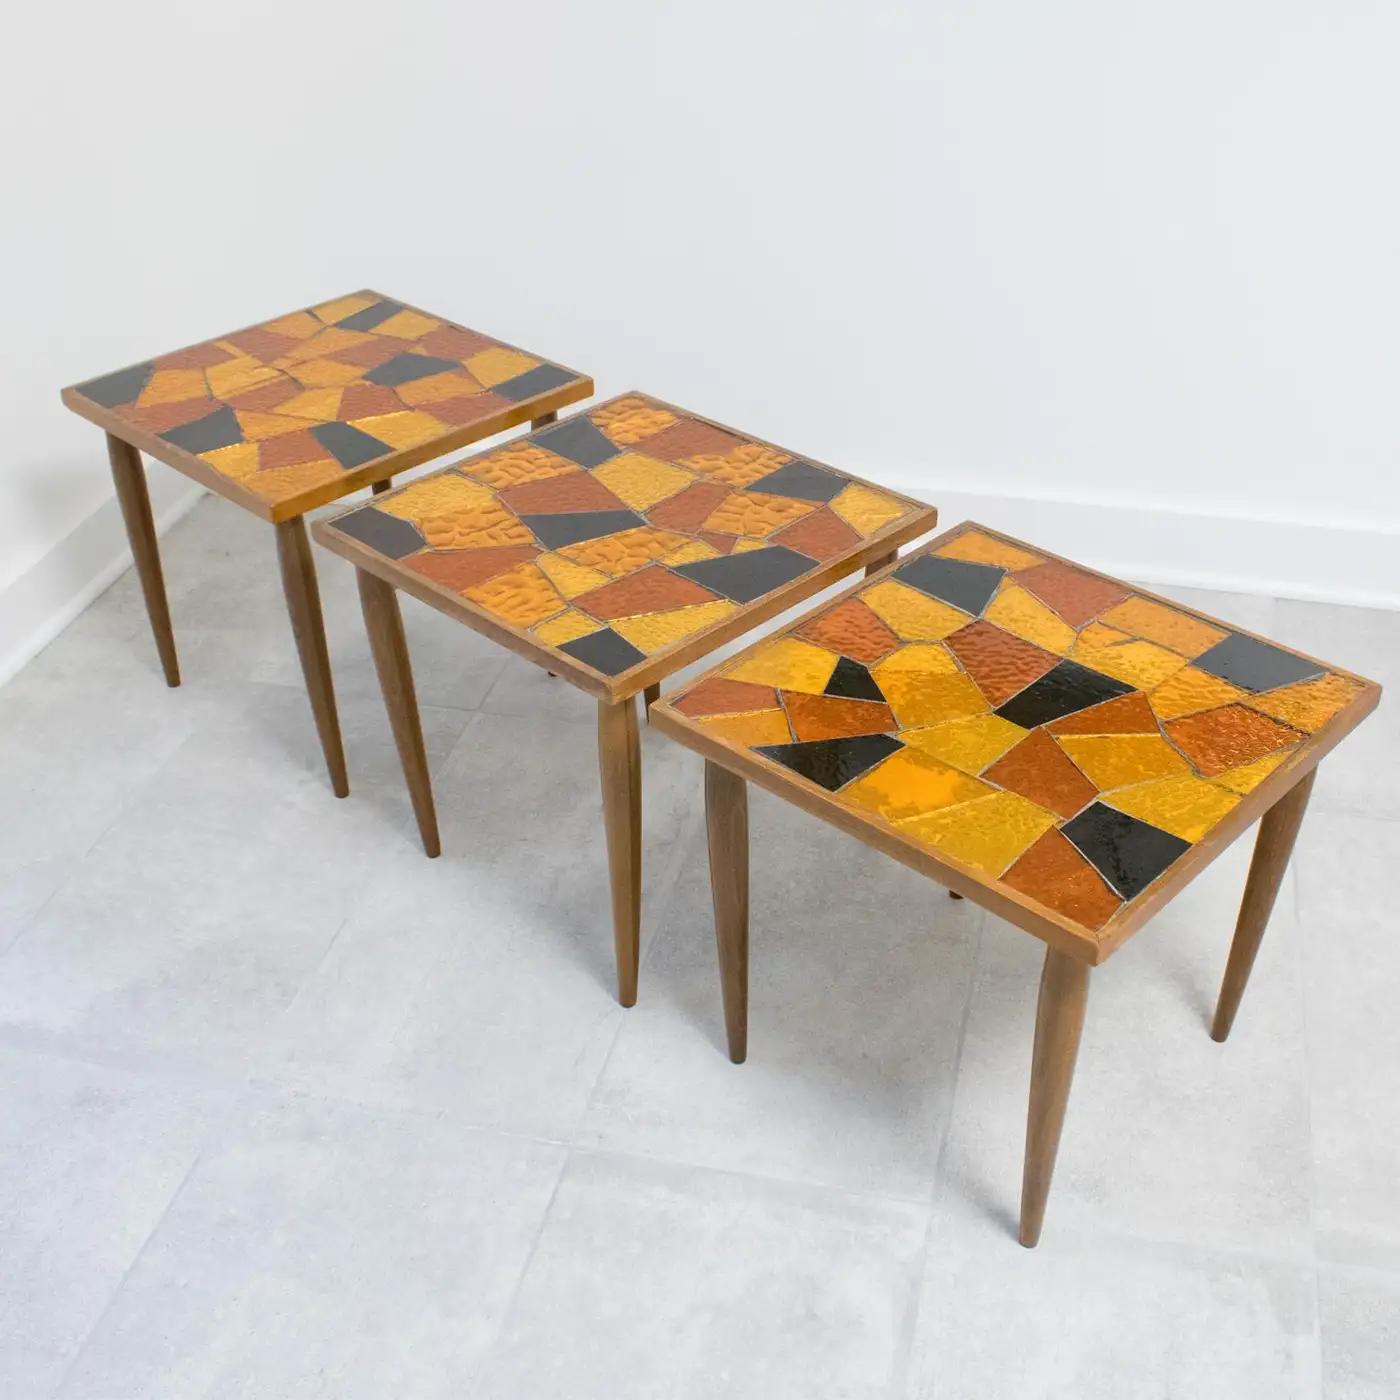 20th Century Mid-Century Modern Georges Briard Mosaic Glass Wooden Side Table Set, 3 pieces For Sale